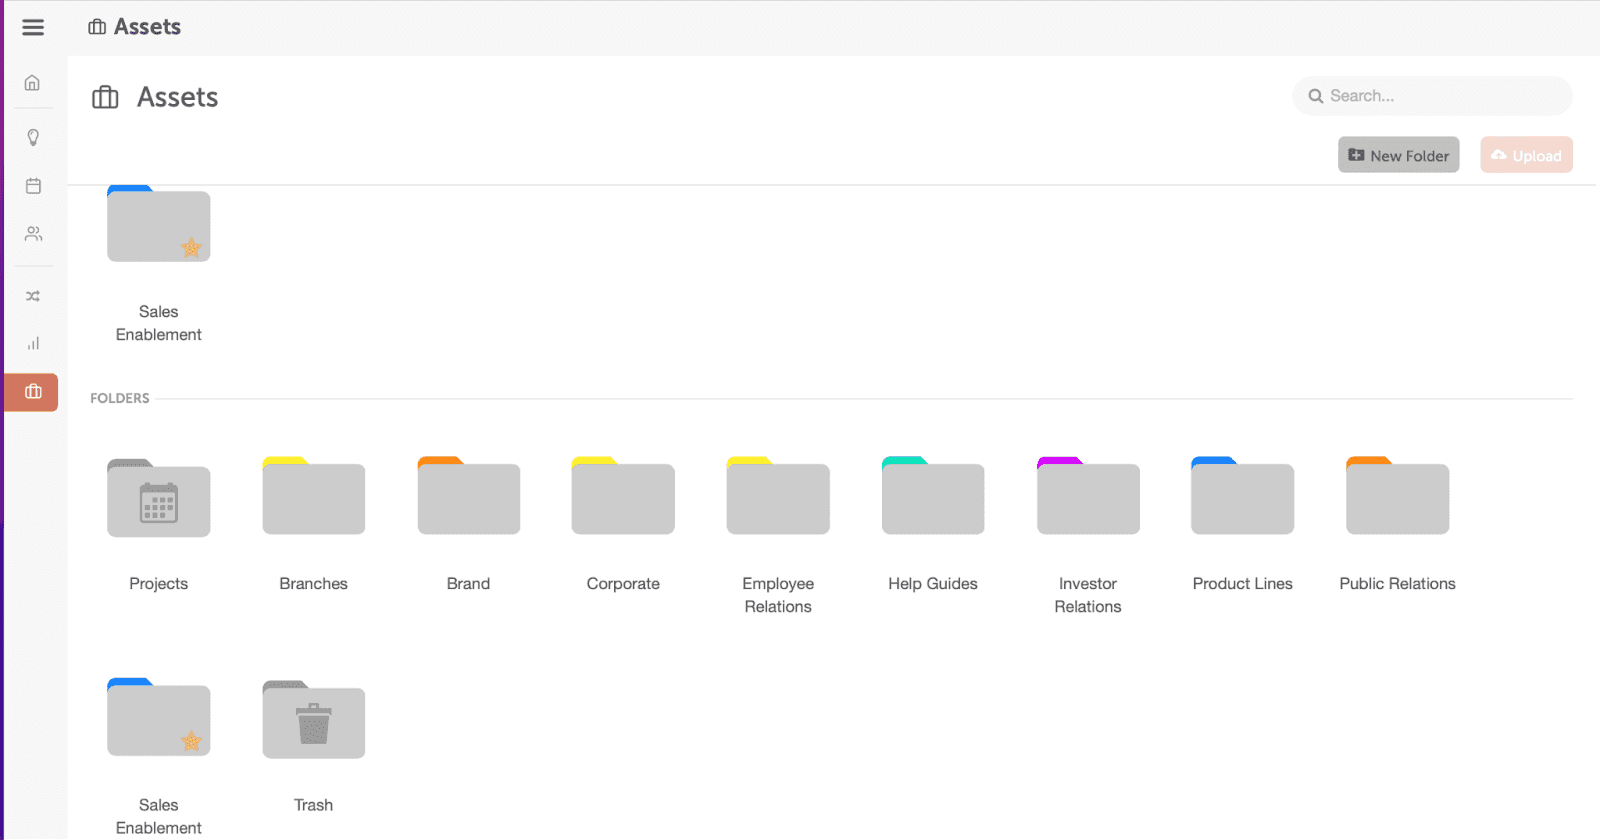 CoSchedule asset organizer to find and store documents and files